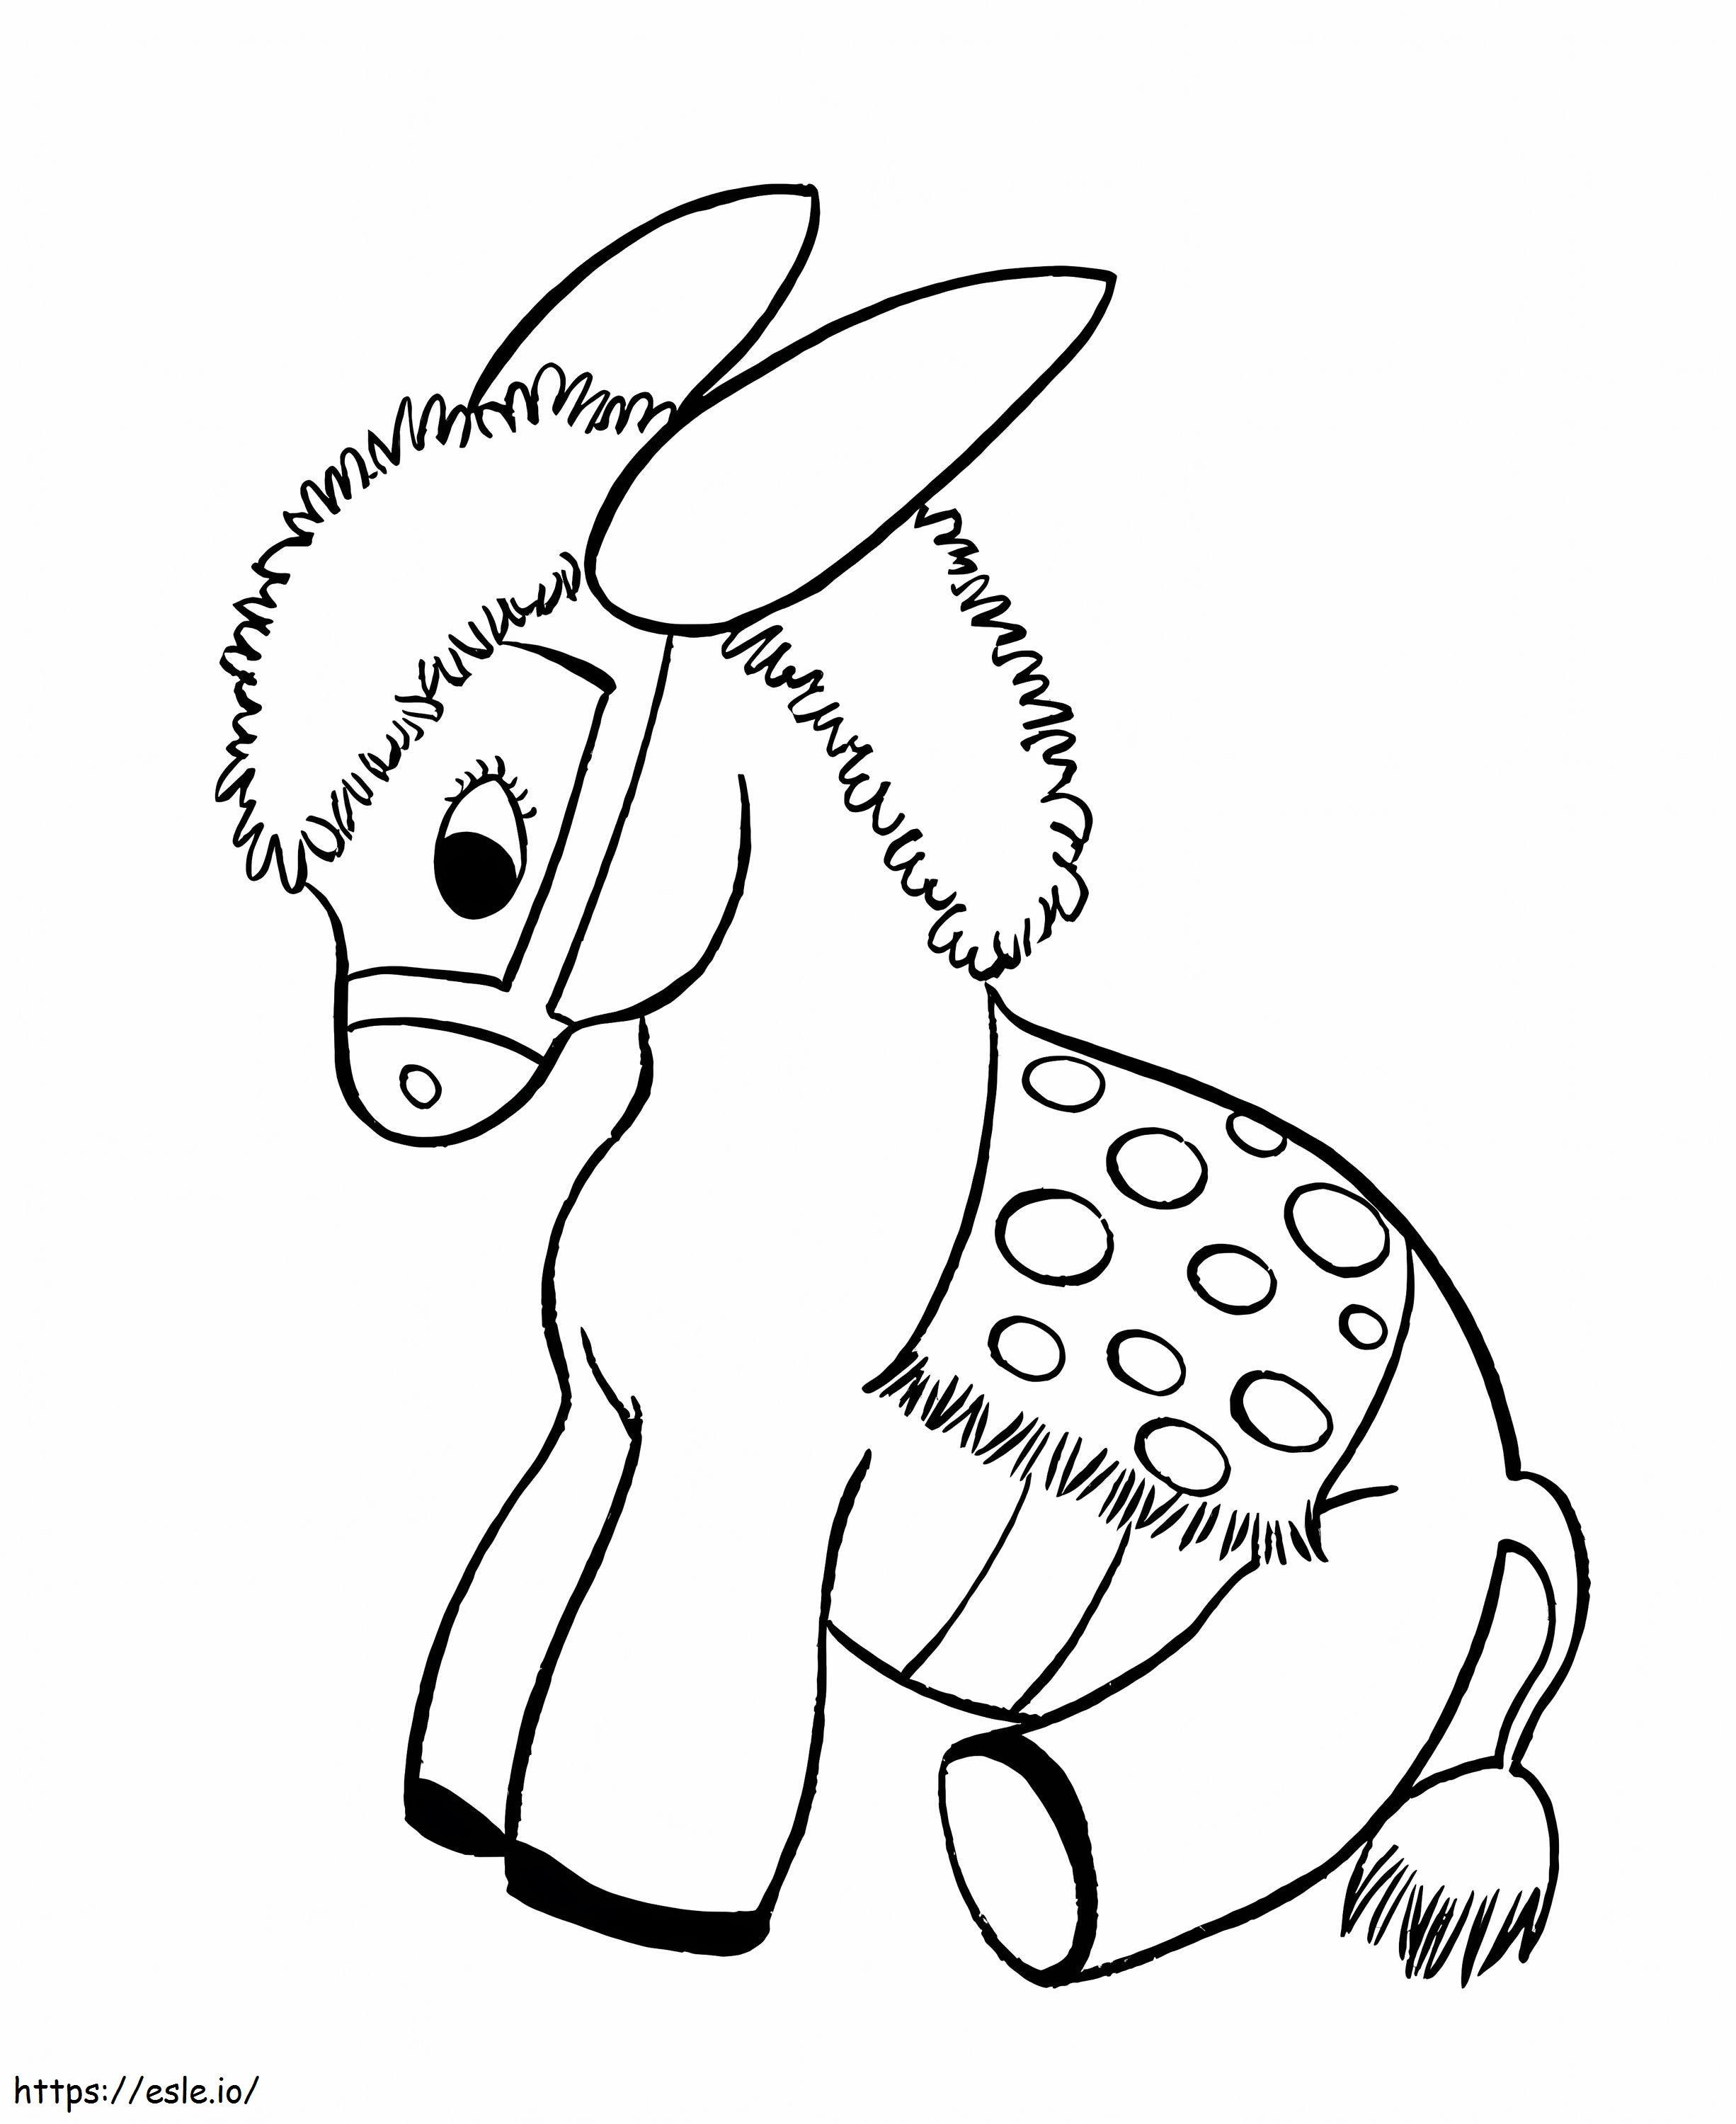 Sitting Donkey coloring page